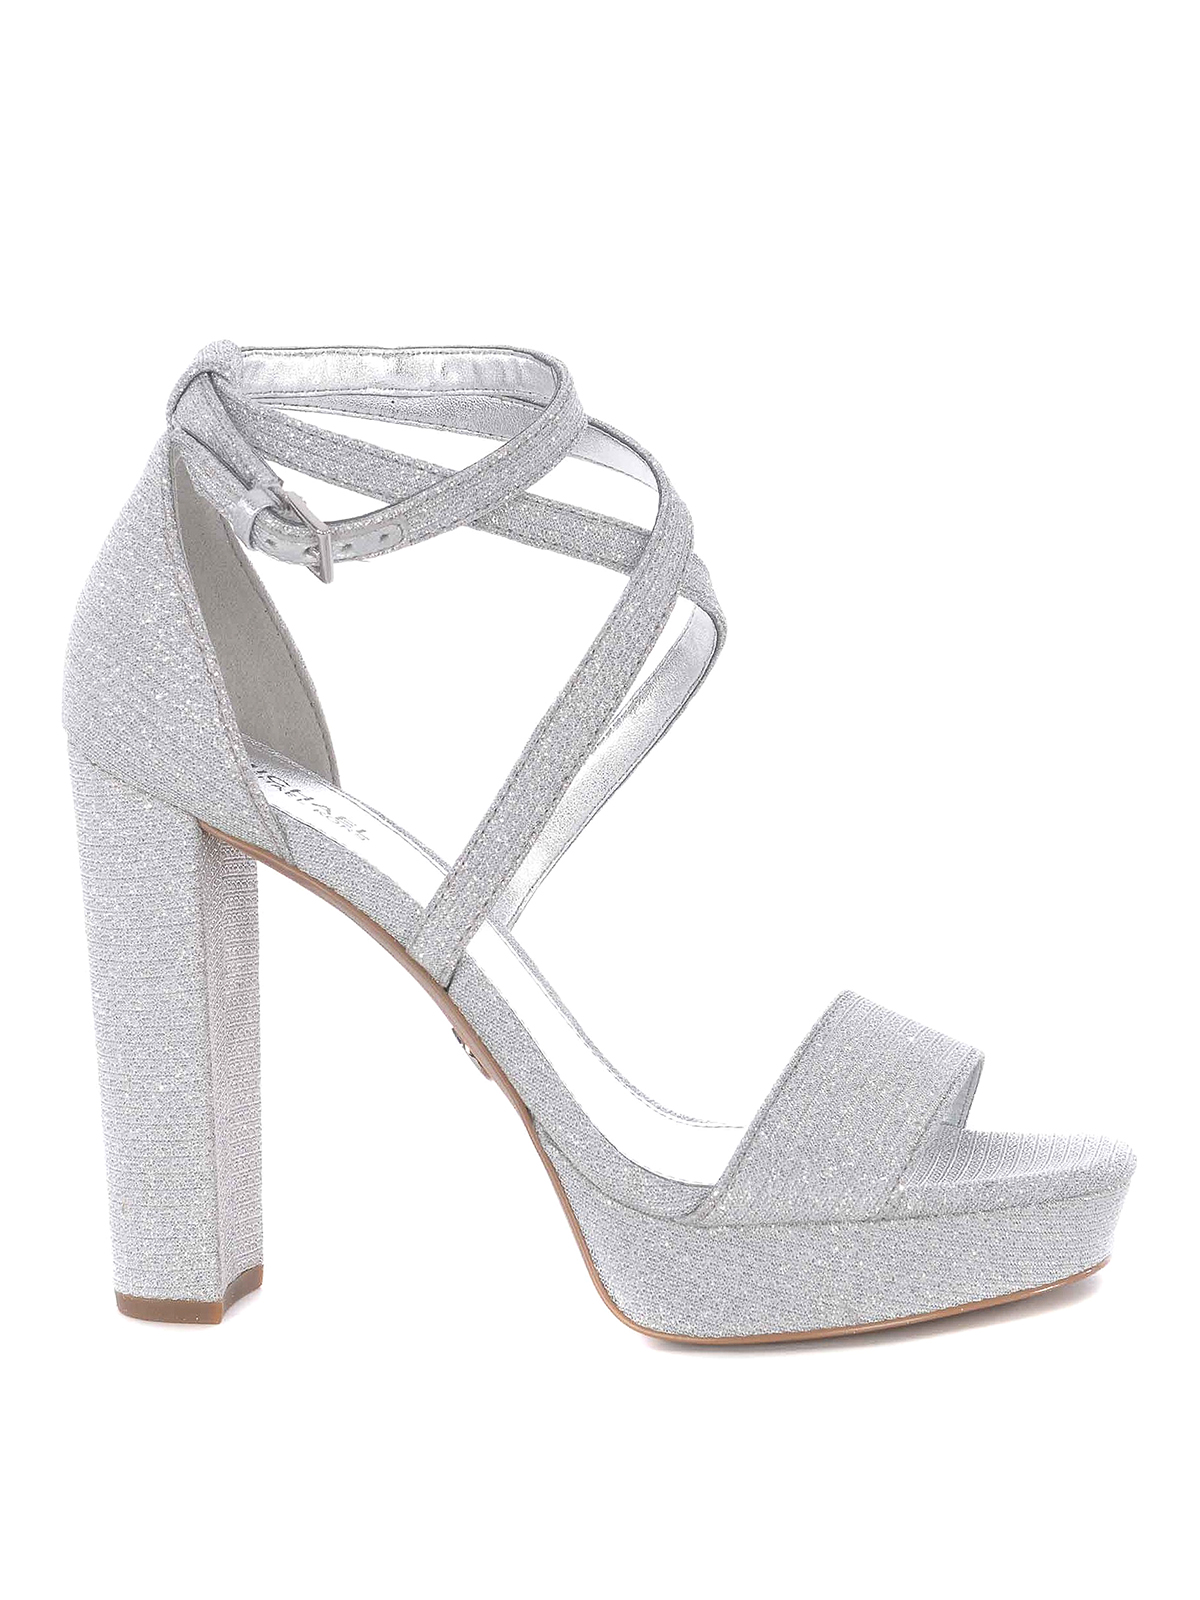 Michael Kors Charlize Lurex Sandals In Silver